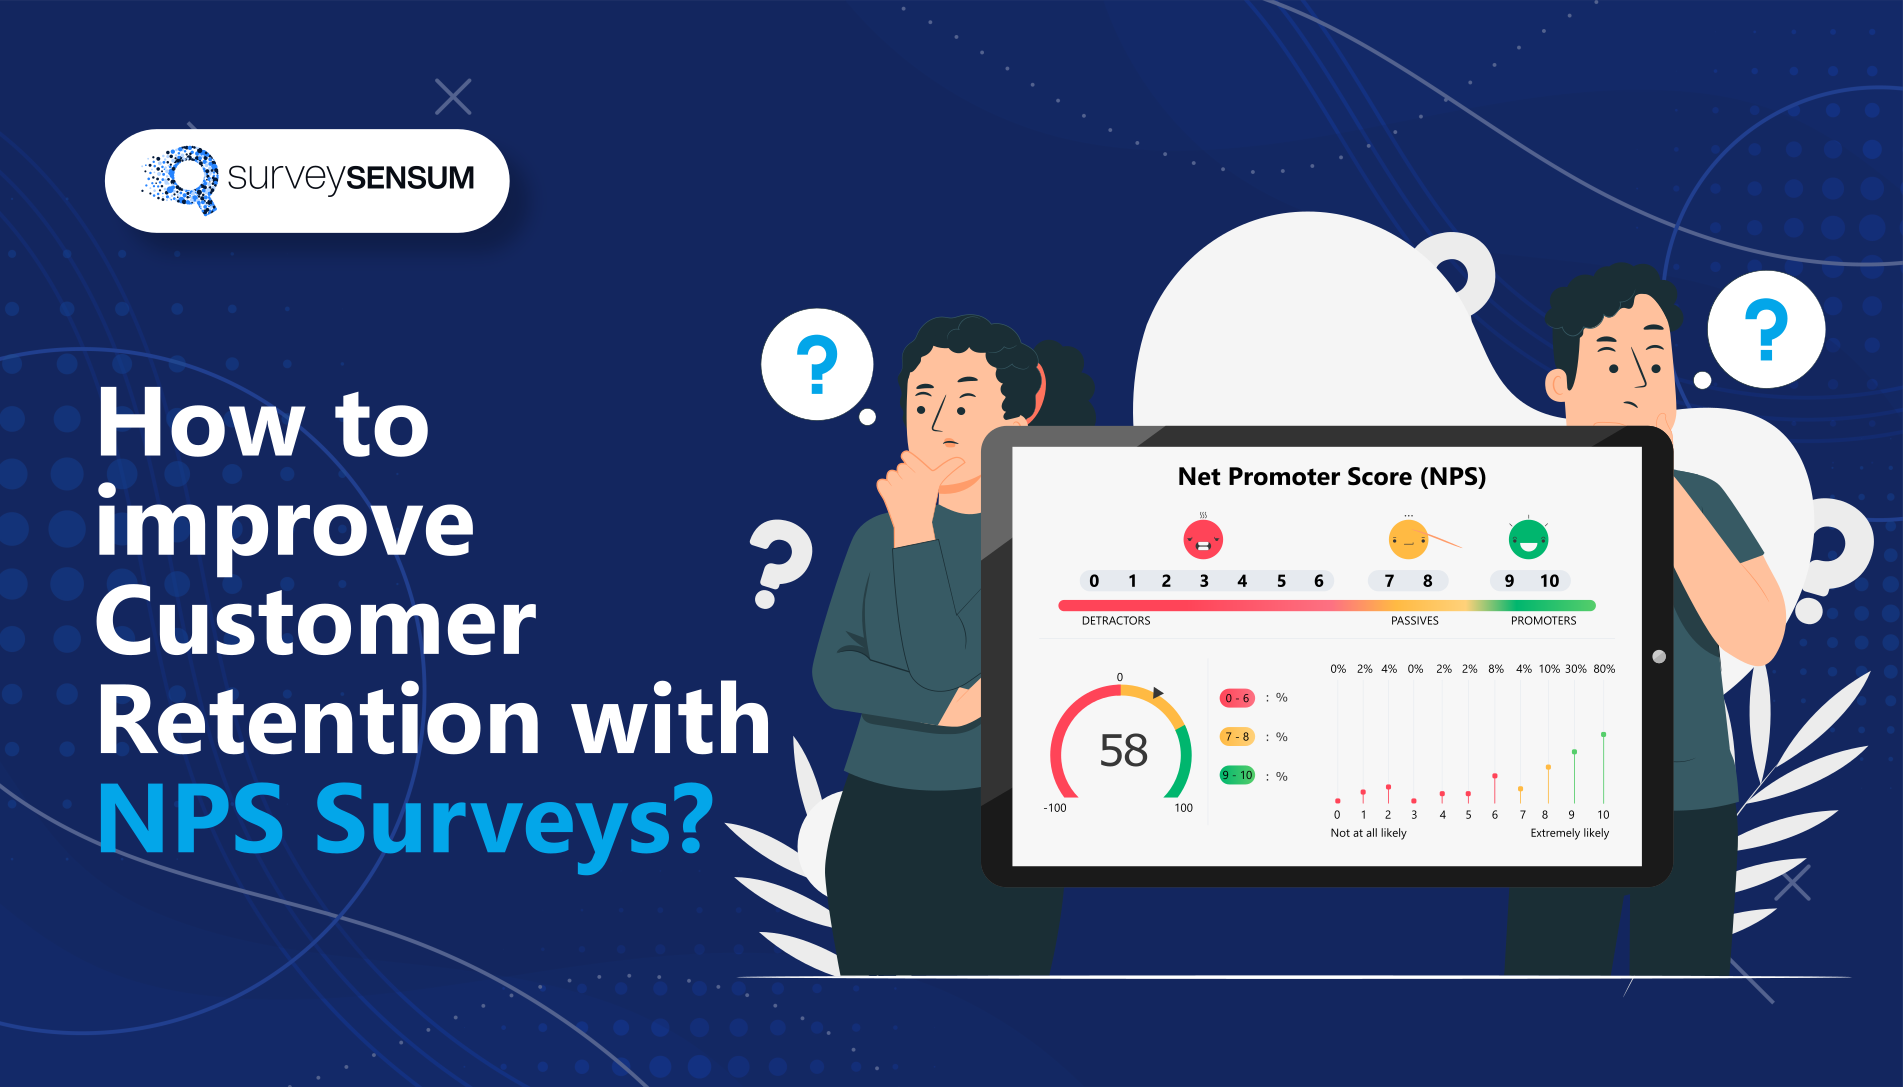 How to Improve Customer Retention with NPS Surveys?